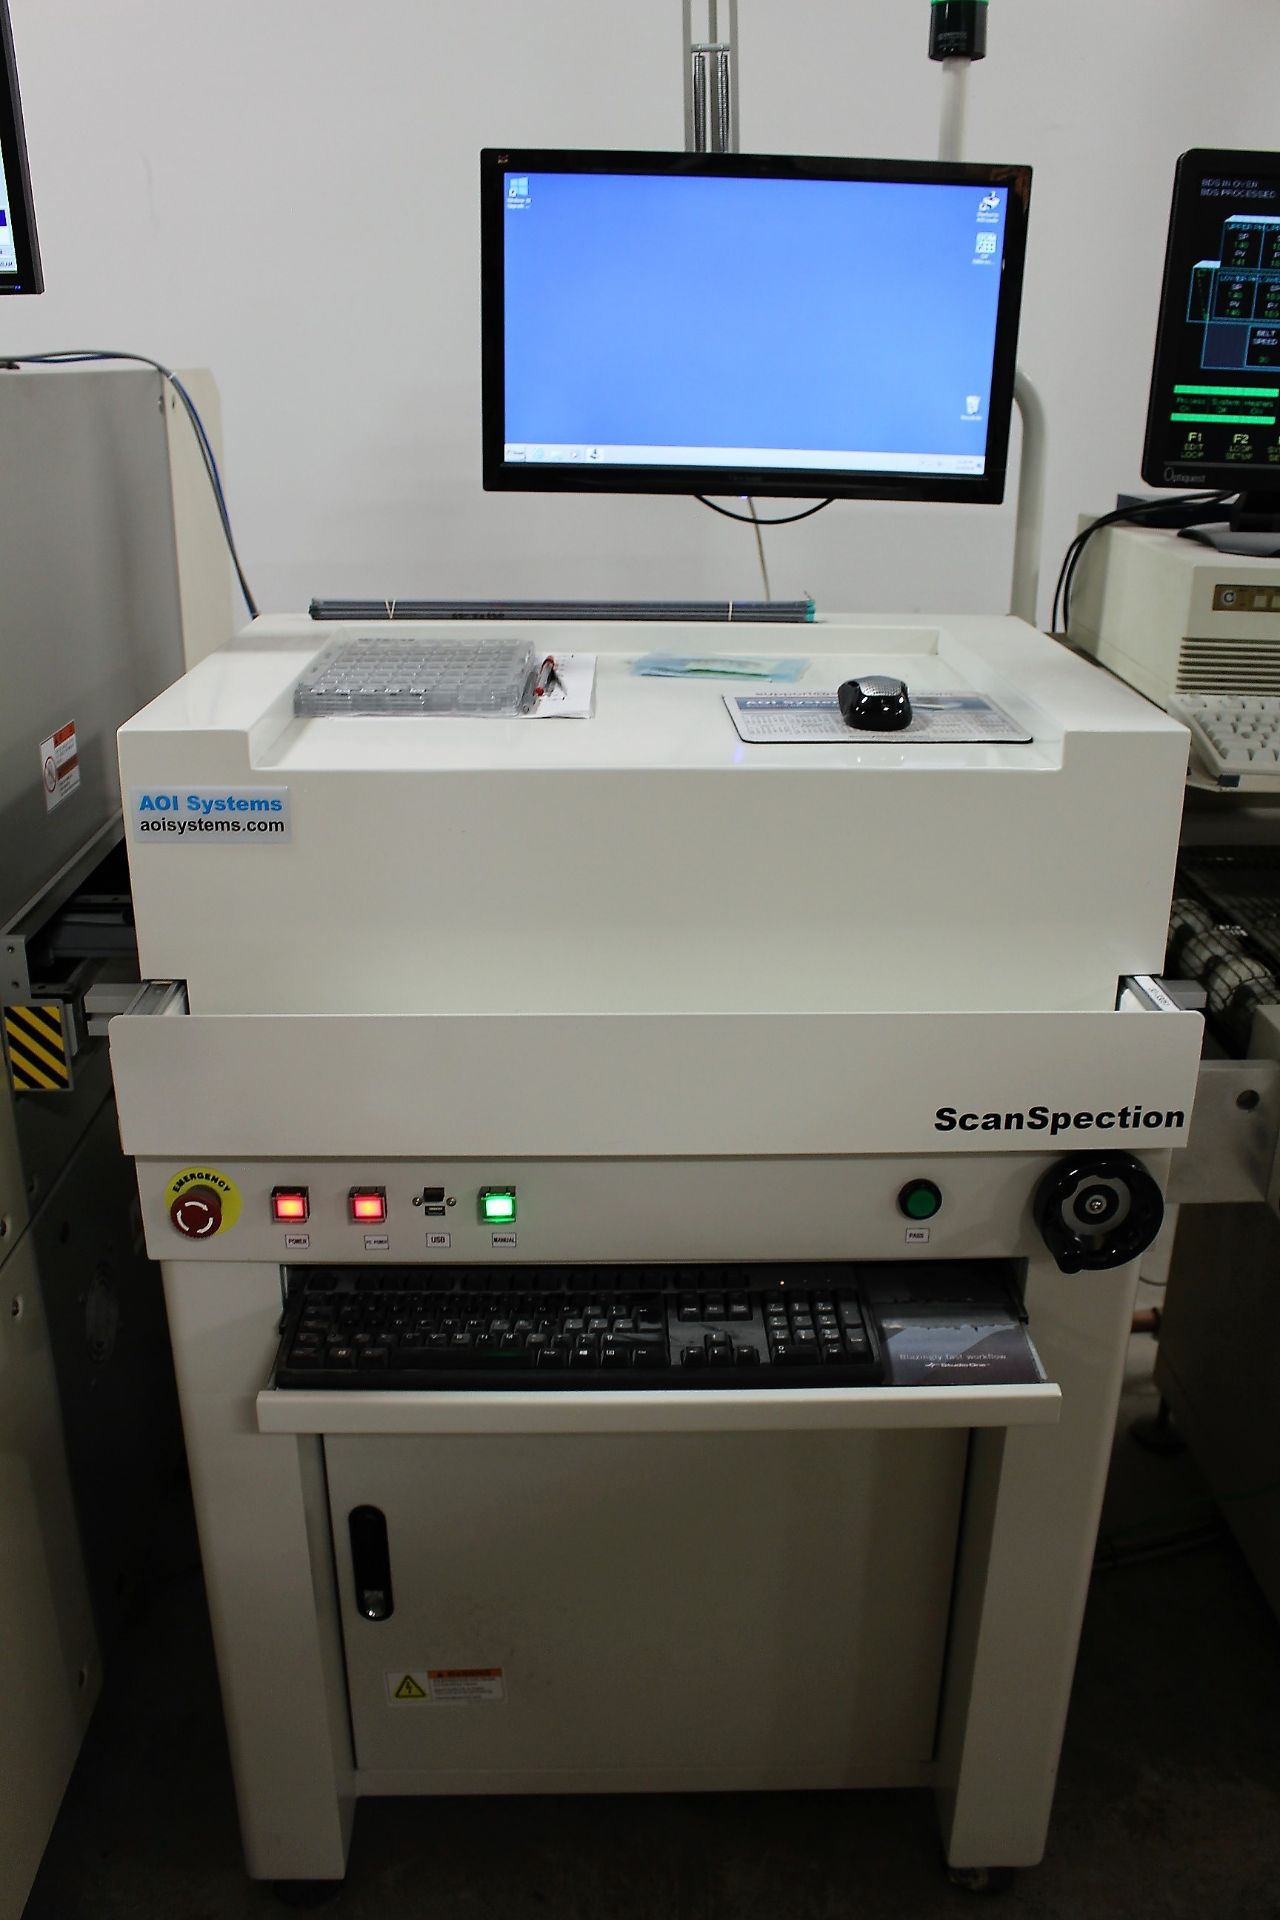 2014 AOI SYSTEMS SCANSPECTION SYSTEM SS15000IL, MODIFIED EPSON GT20000 A3 SCANNER (600 DPI OPTICAL)